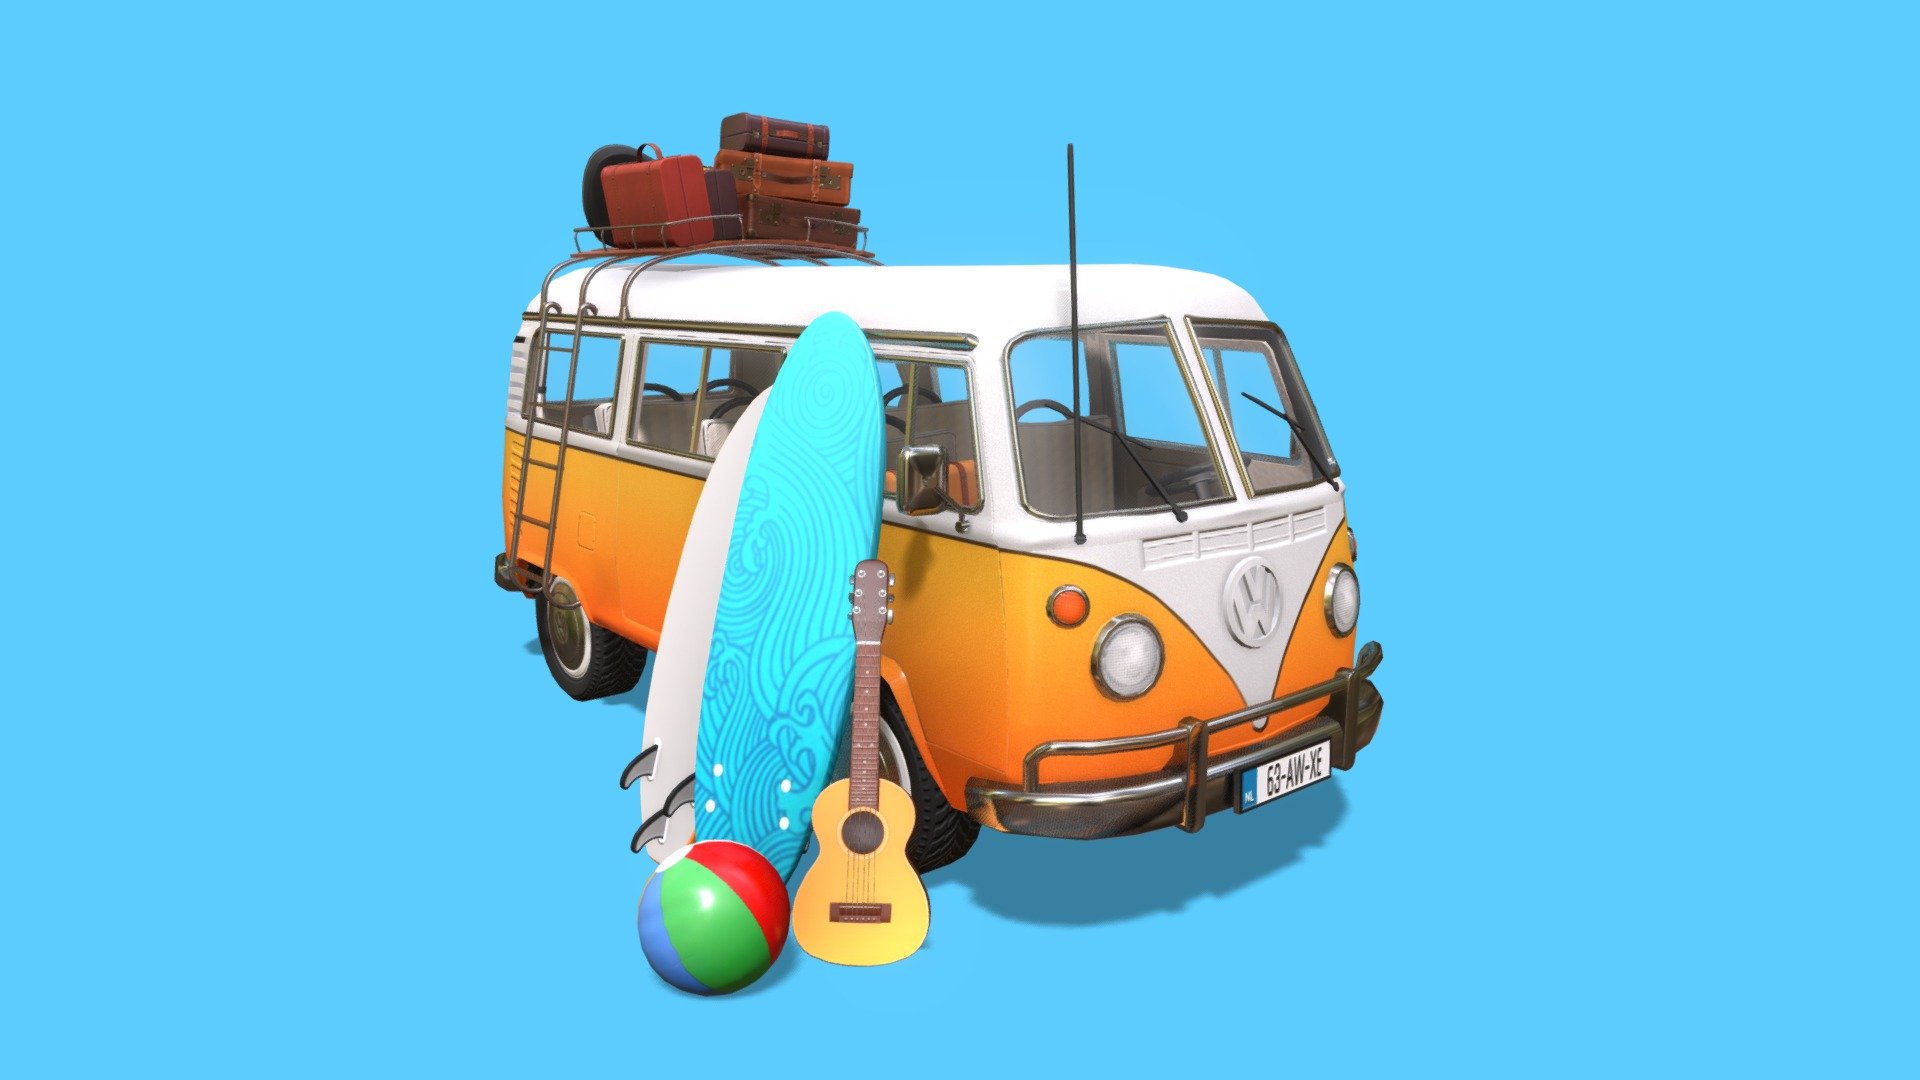 The Volkswagen Van Asset Pack has several different texture variations and two white ones so you can paint your own! This pack also includes multiple props to decorate your van 3d model